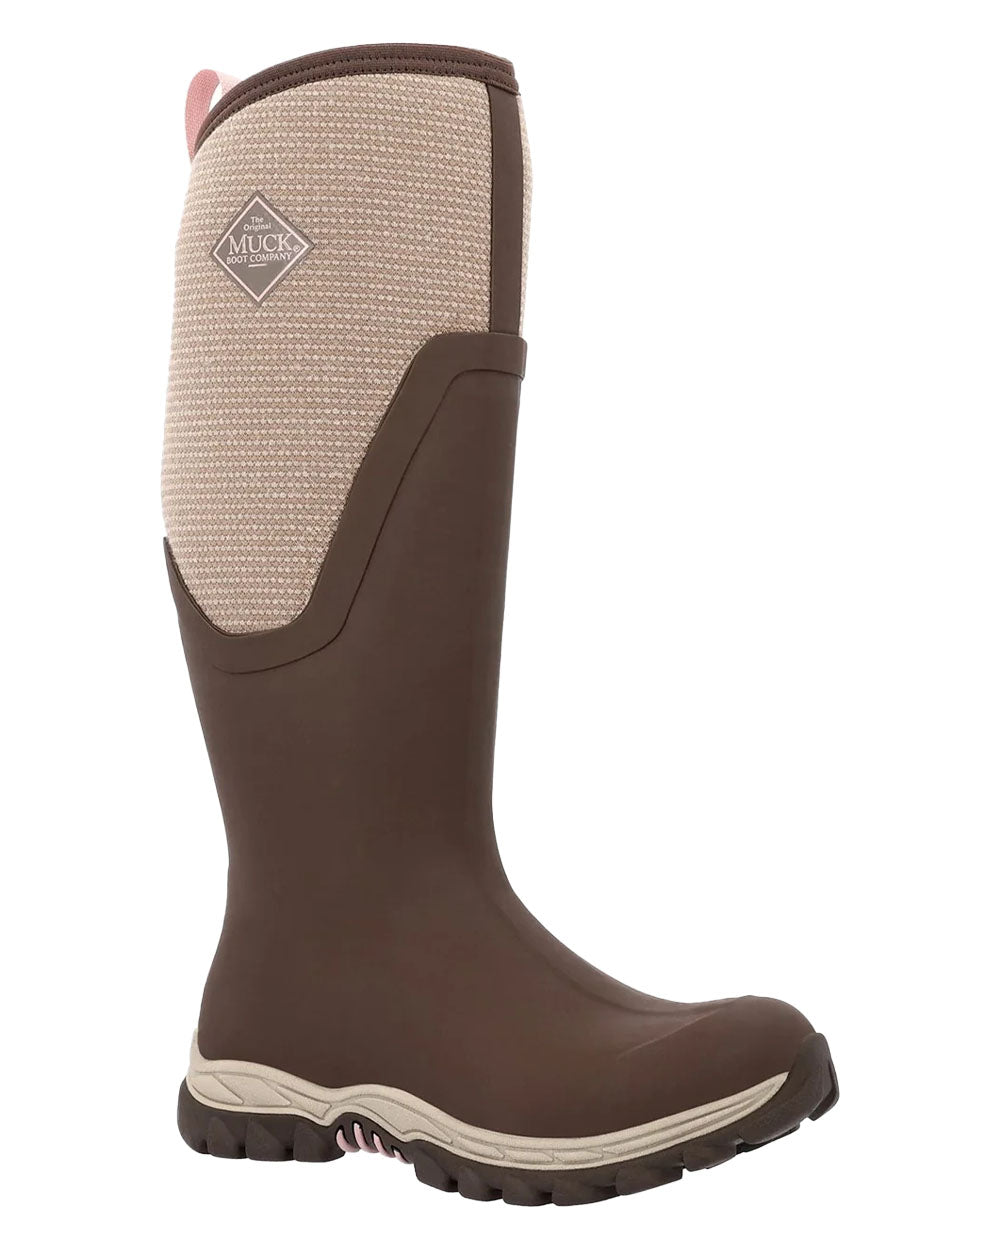 Chocolate Brown Walnut Woven Muck Boots Womens Artic Sport II Tall Wellingtons on White background 